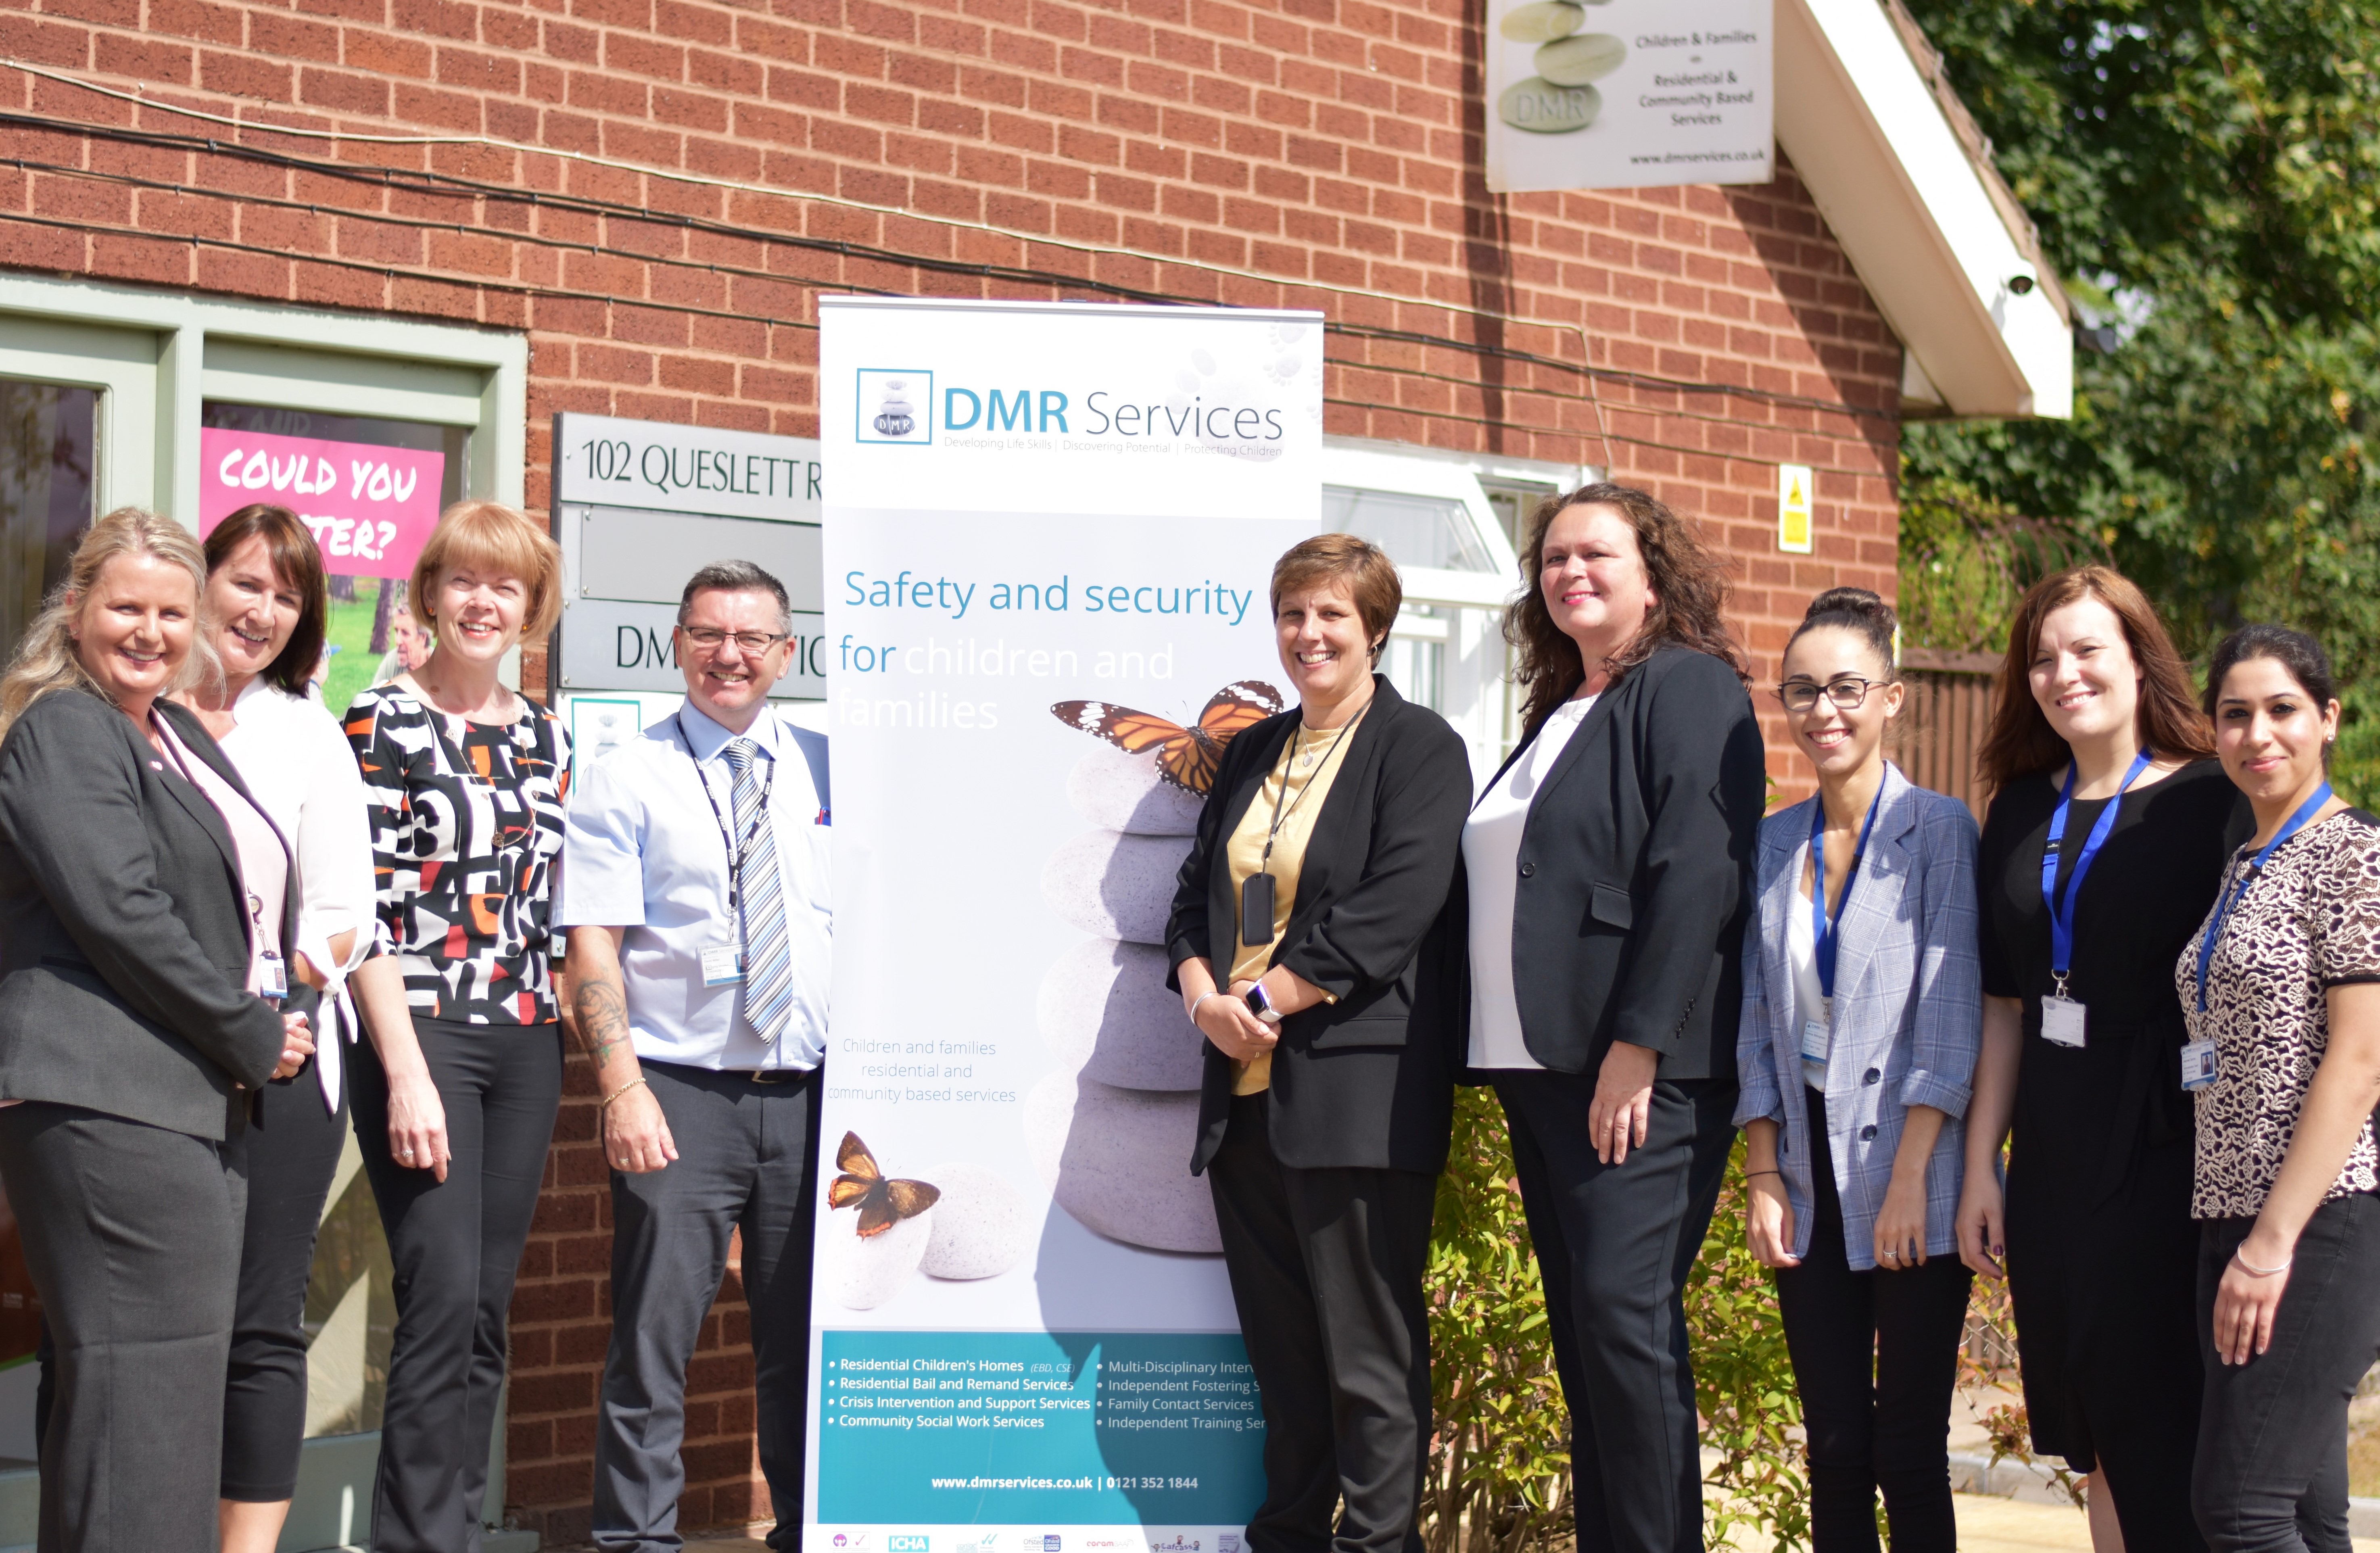 Visit to DMR Services, Streetly